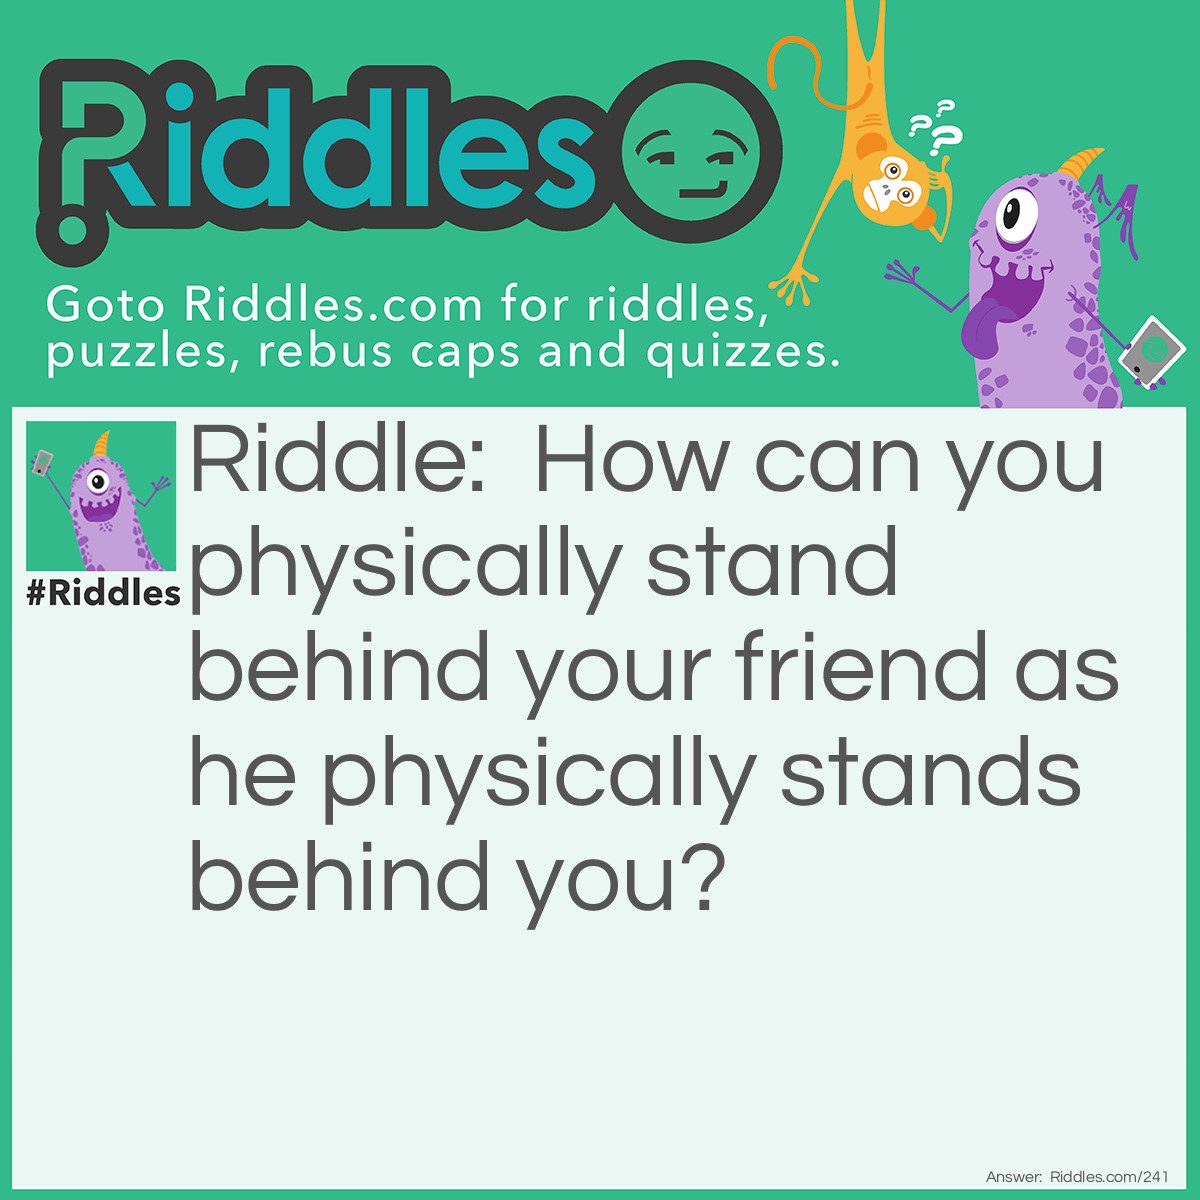 Riddle: How can you physically stand behind your friend as he physically stands behind you? Answer: By standing back to back.